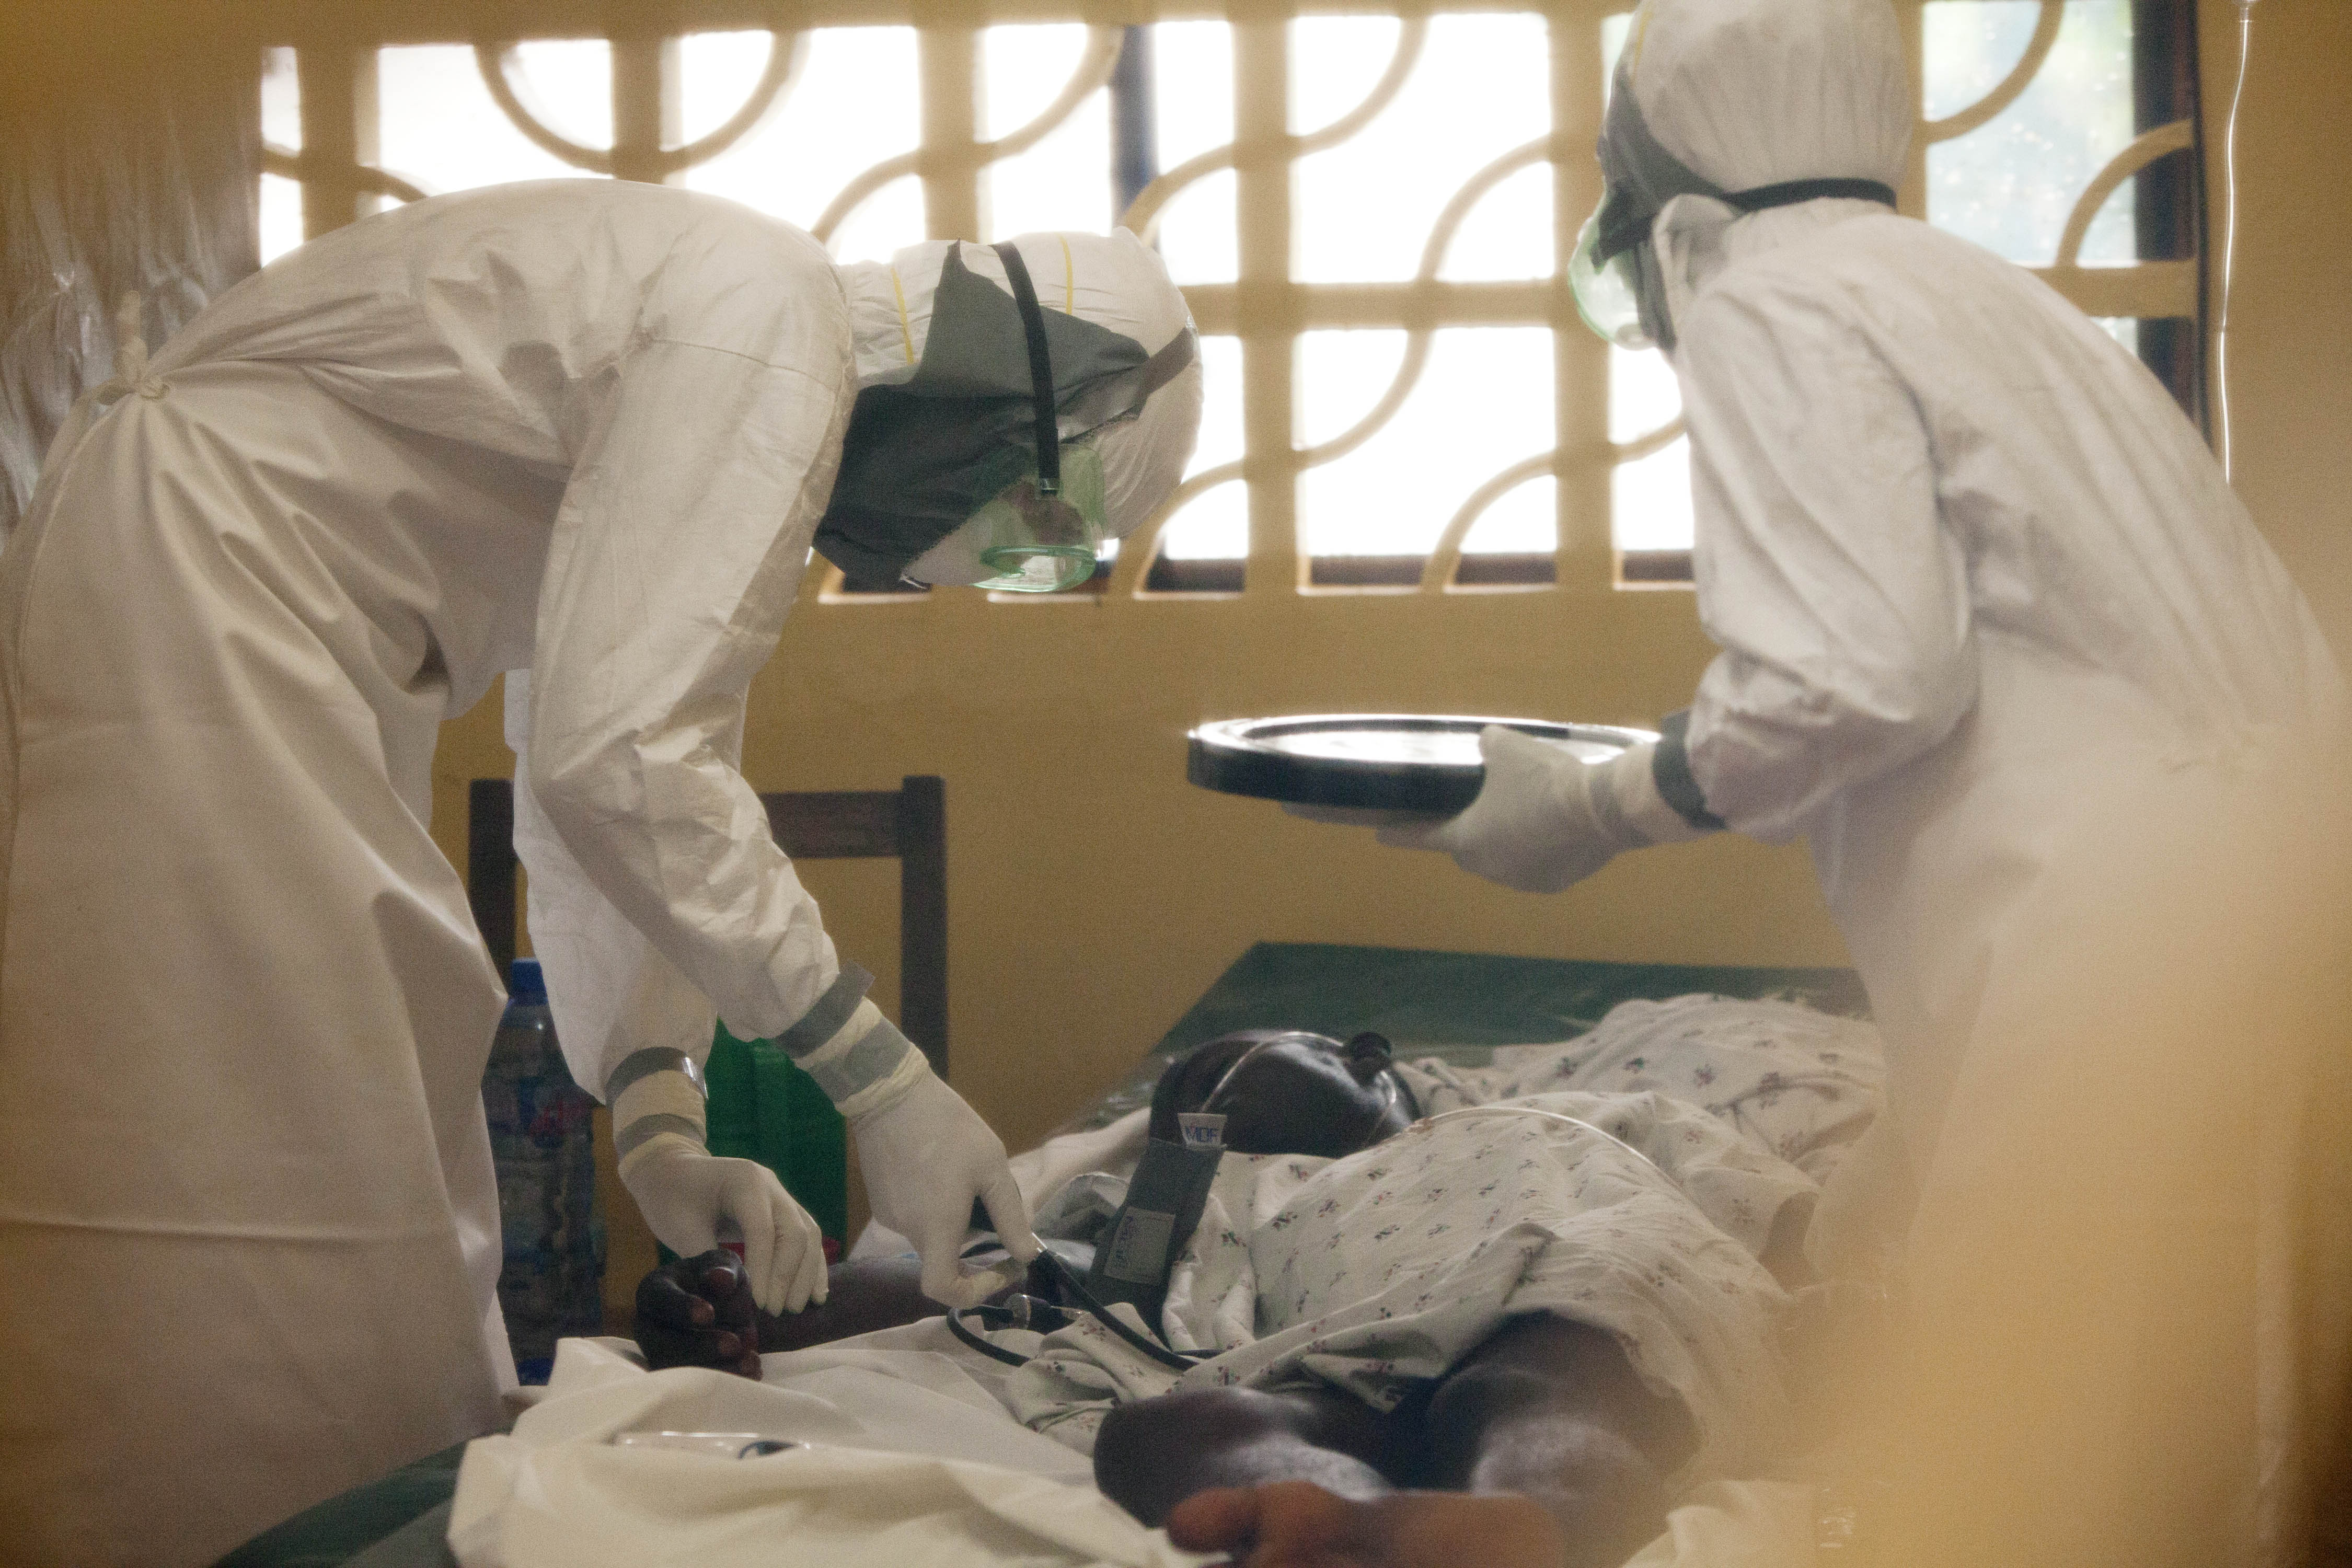 In this 2014 photo provided by the Samaritan's Purse aid organization, Dr. Kent Brantly, left, treats an Ebola patient at the Samaritan's Purse Ebola Case Management Center in Monrovia, Liberia. On Saturday, July 26, 2014, the North Carolina-based aid organization said Brantly tested positive for the disease and was being treated at a hospital in Monrovia. (AP Photo/Samaritan's Purse)